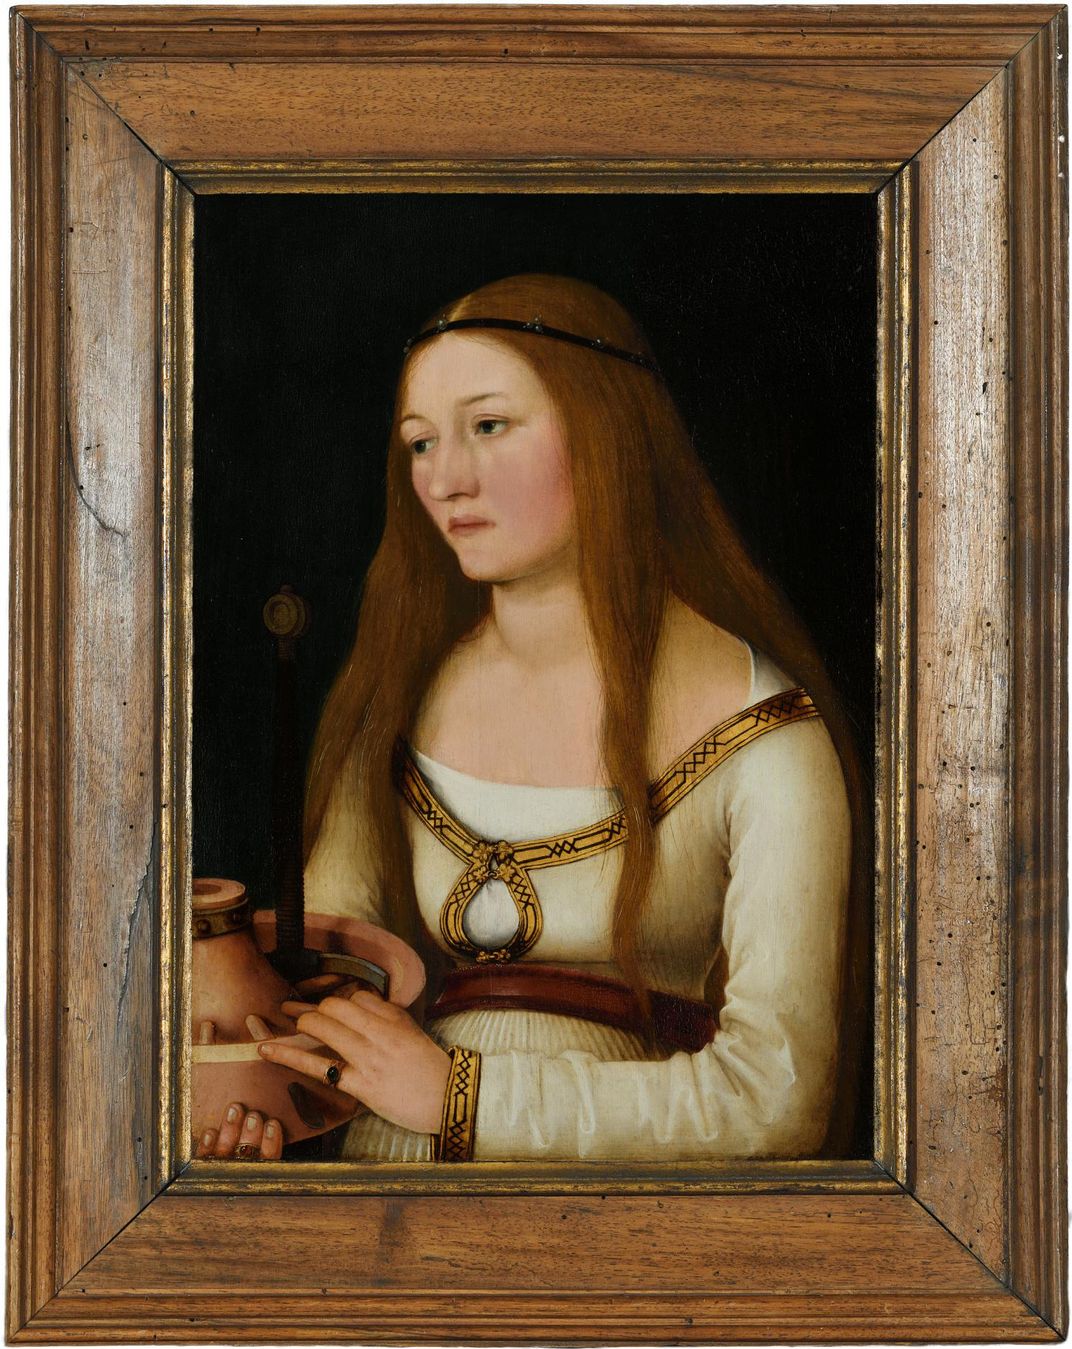 A portrait of a woman with long hair, holding a wheel and spoke and looking somber